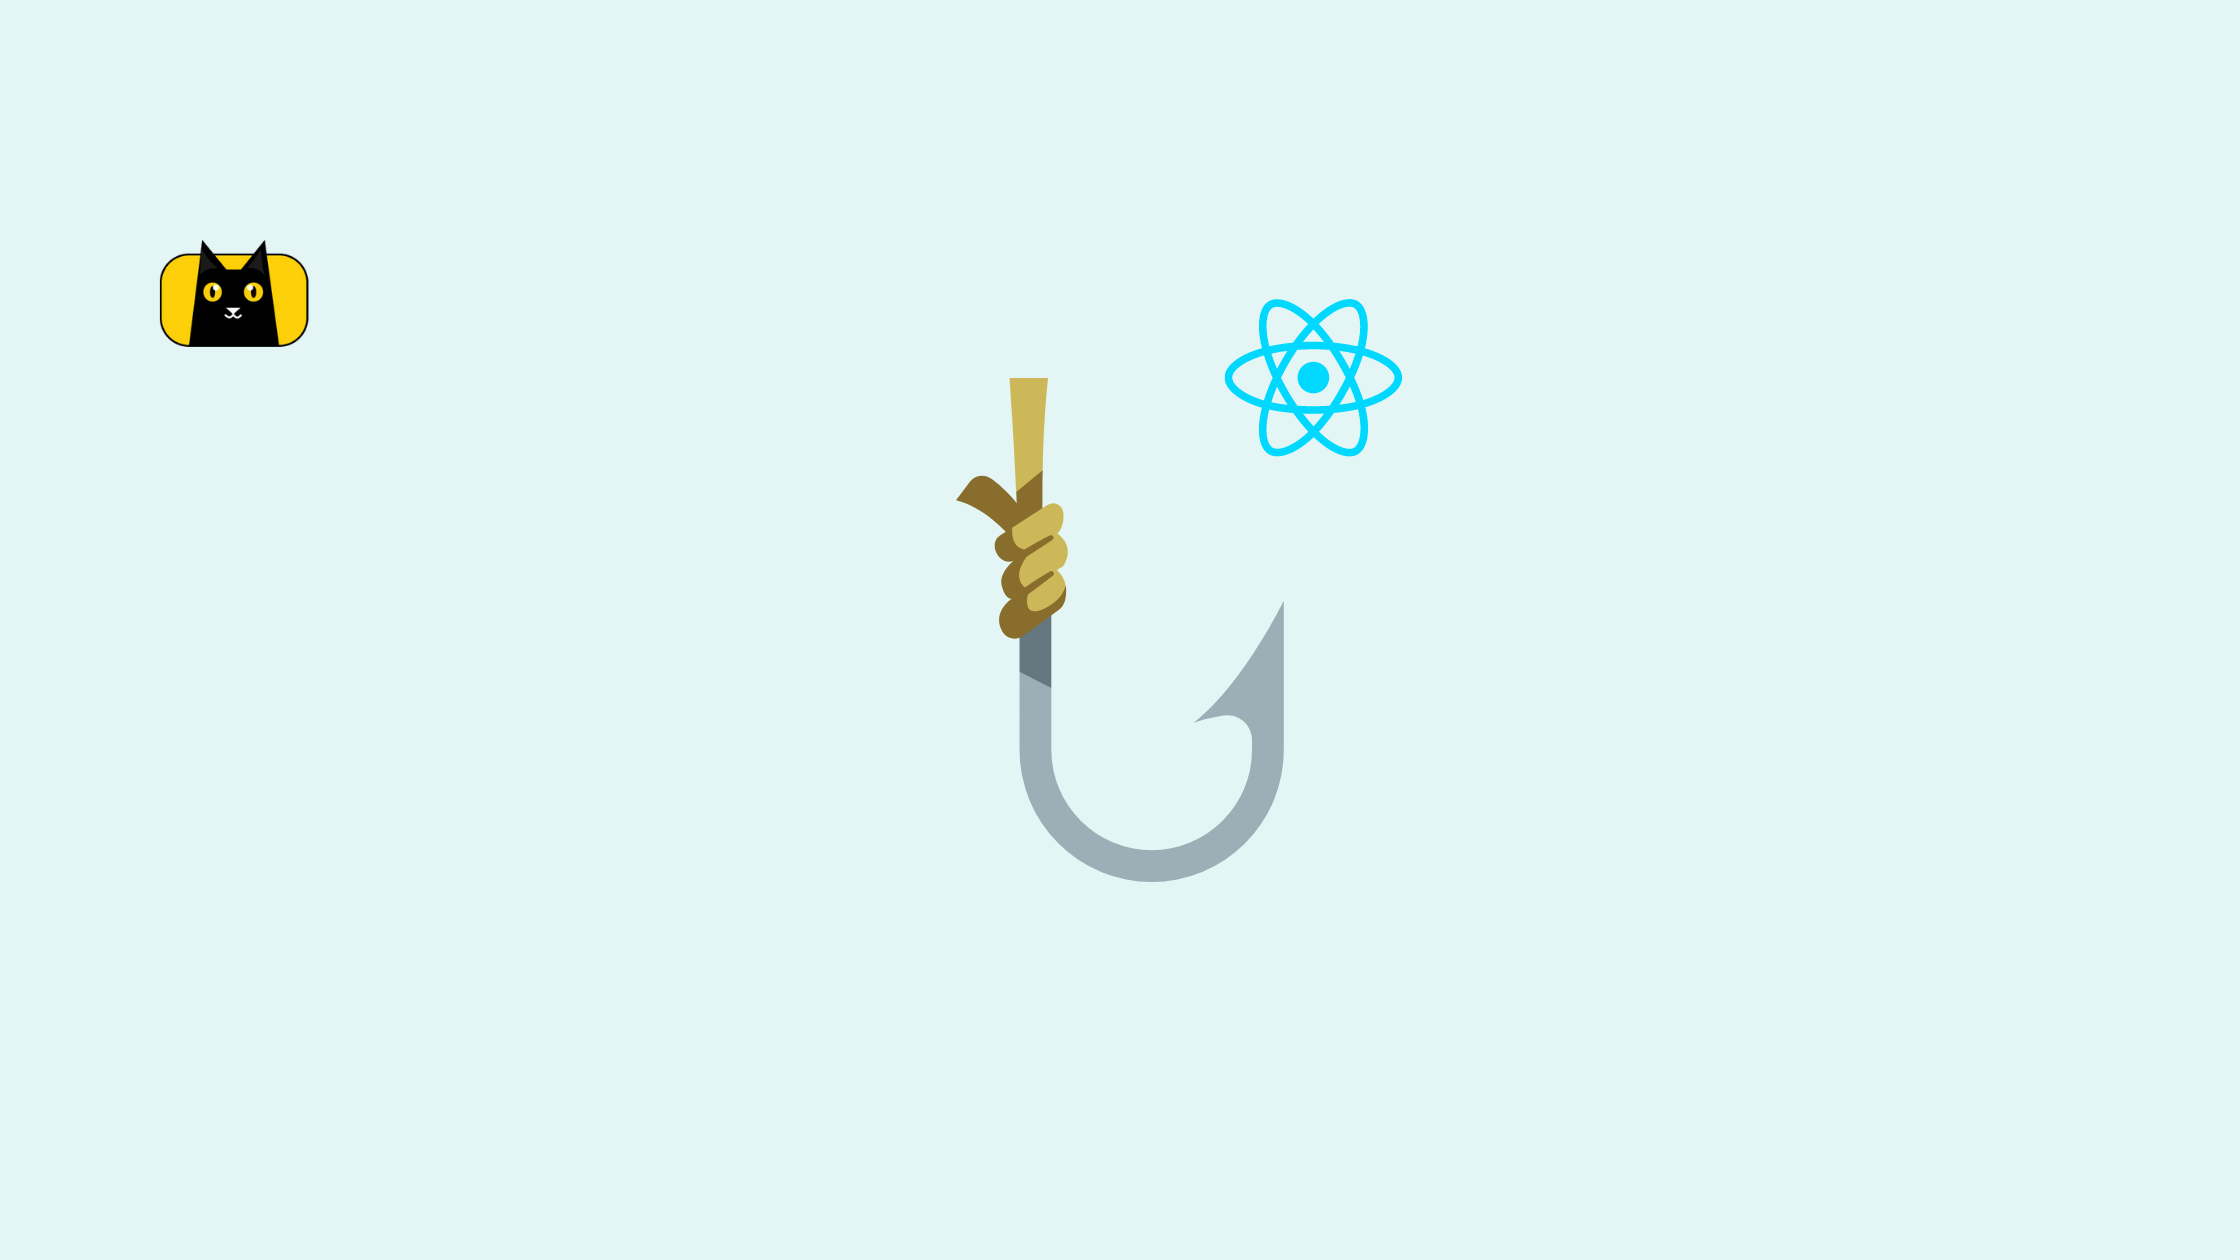 A picture of a hook, a React logo, and a CopyCat logo.